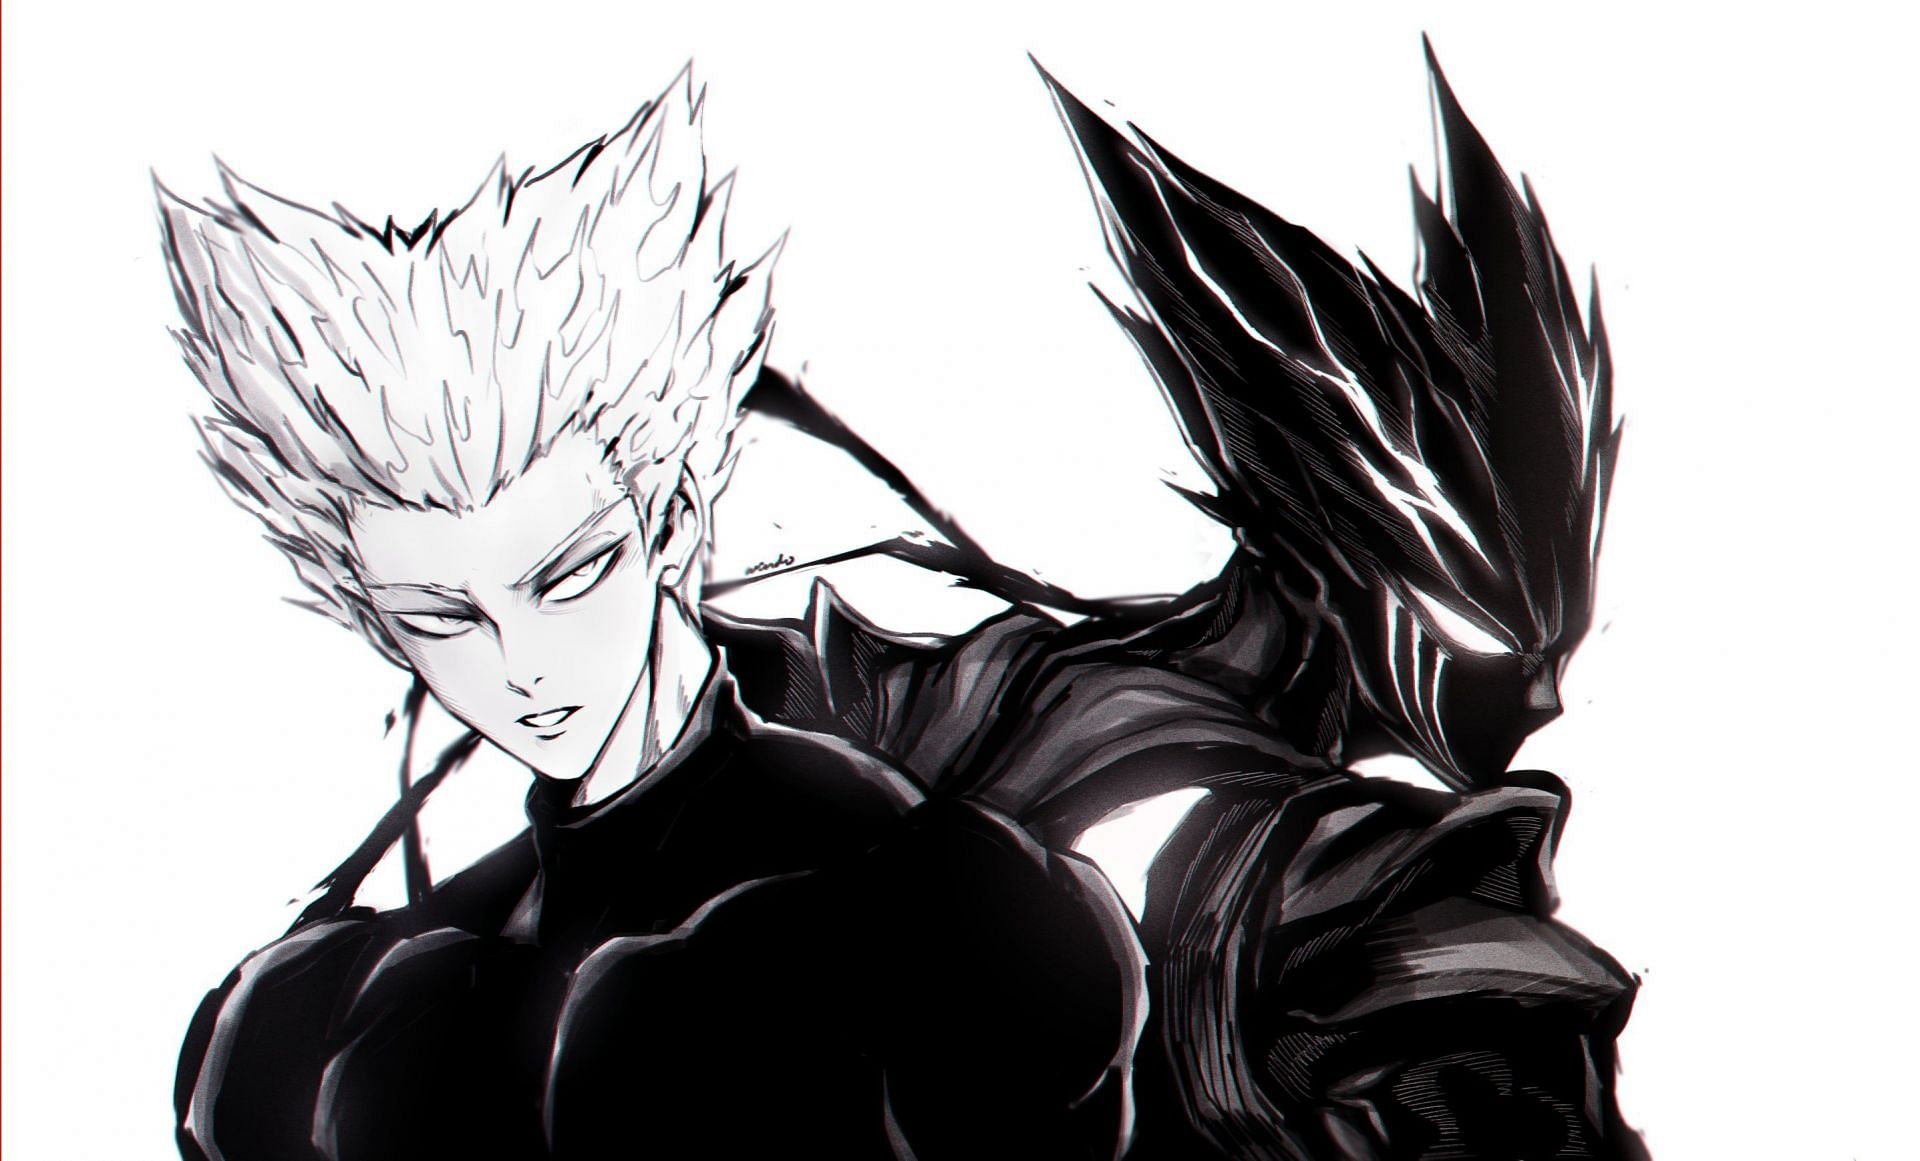 Who would win, Cosmic Garou or every single character in all of